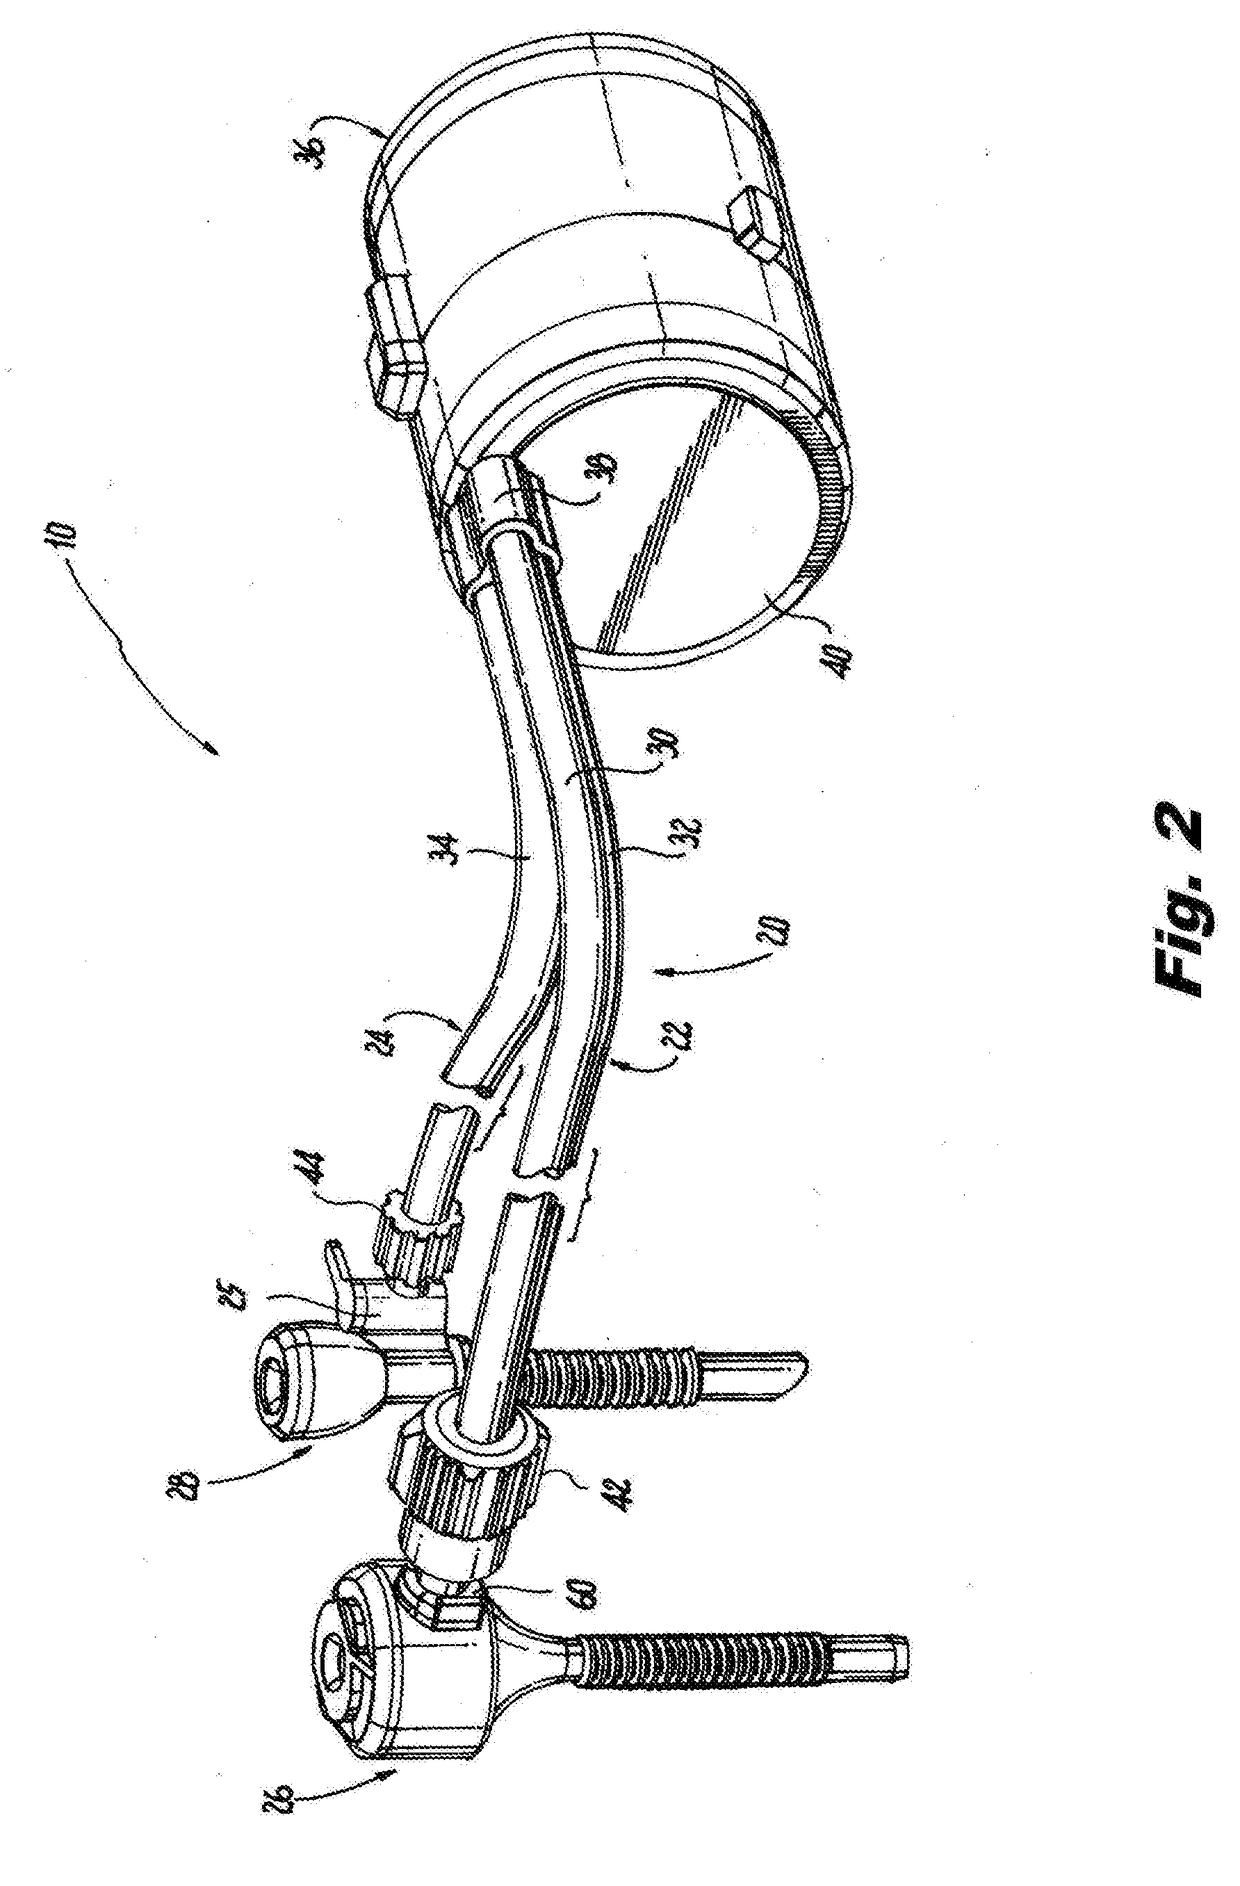 Separable two-part single lumen gas sealed access port for use during endoscopic surgical procedures